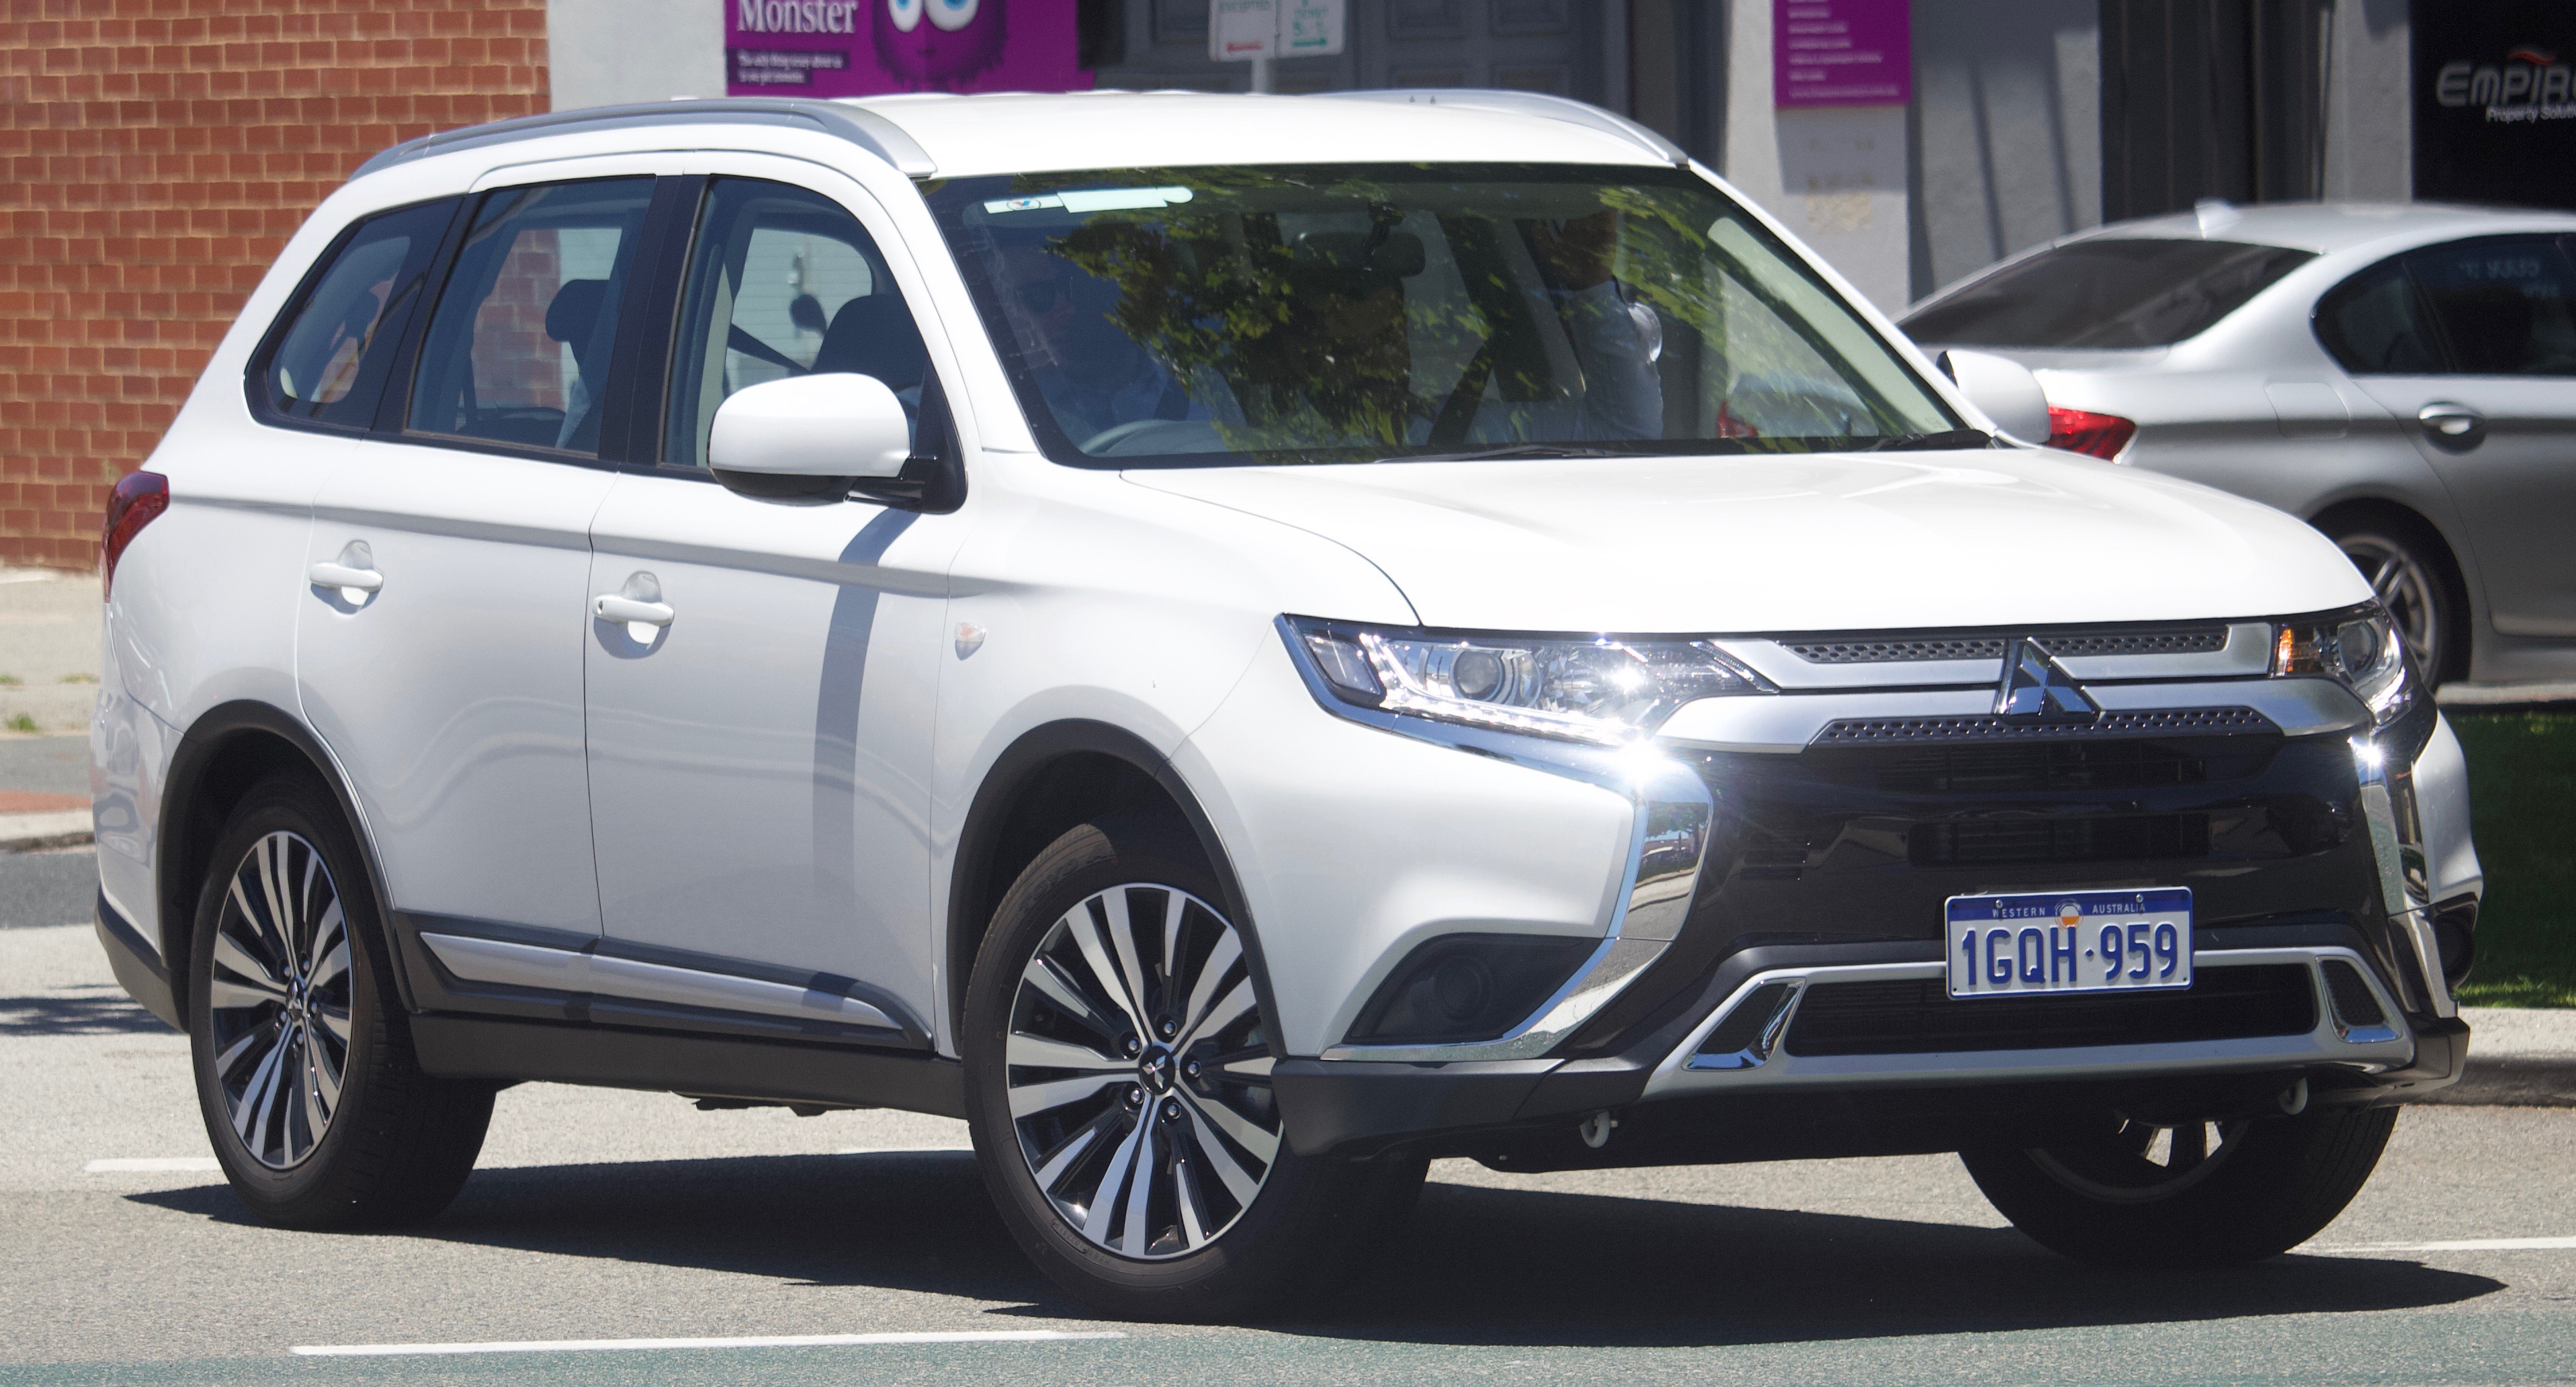 Mitsubishi Outlander hd specifications